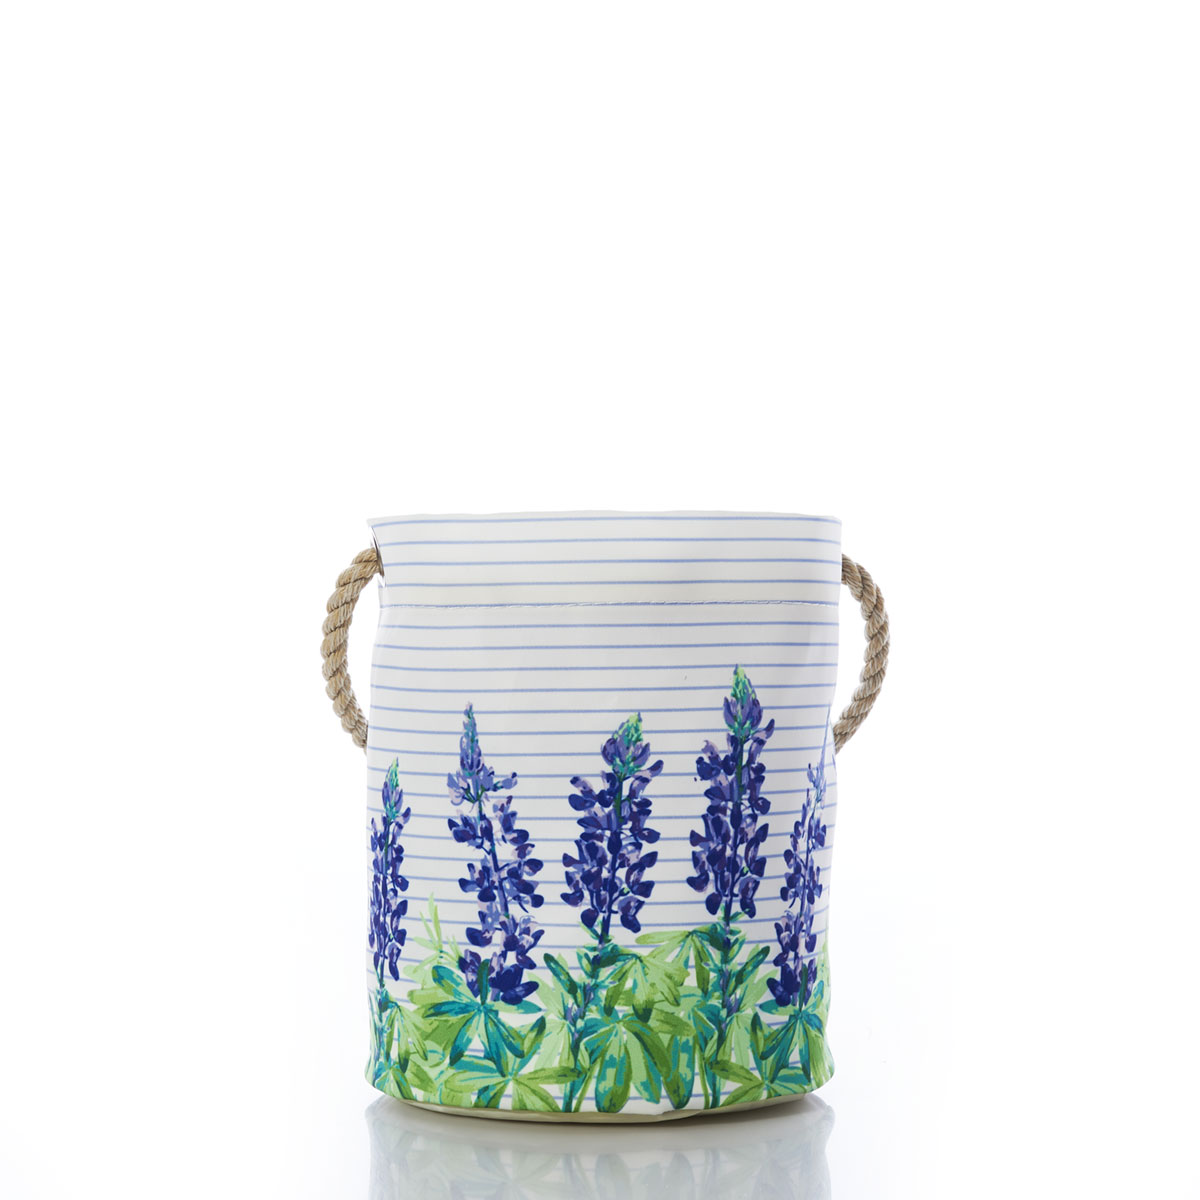 a recycled sail cloth bucket bag is printed with thin blue stripes behind a row of purple and green lupine flowers and finished with a hemp rope handle